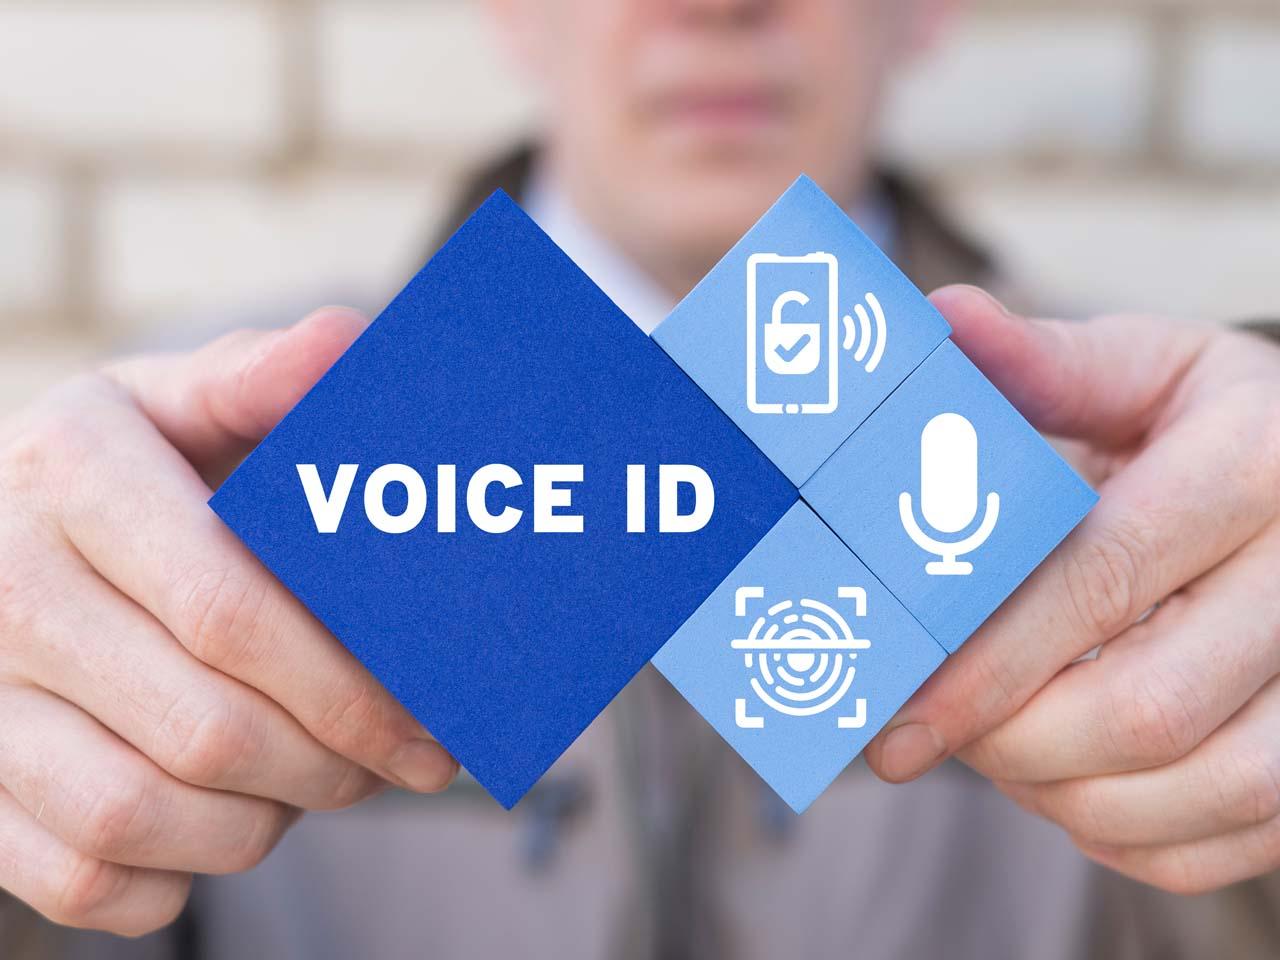 Voice ID systems